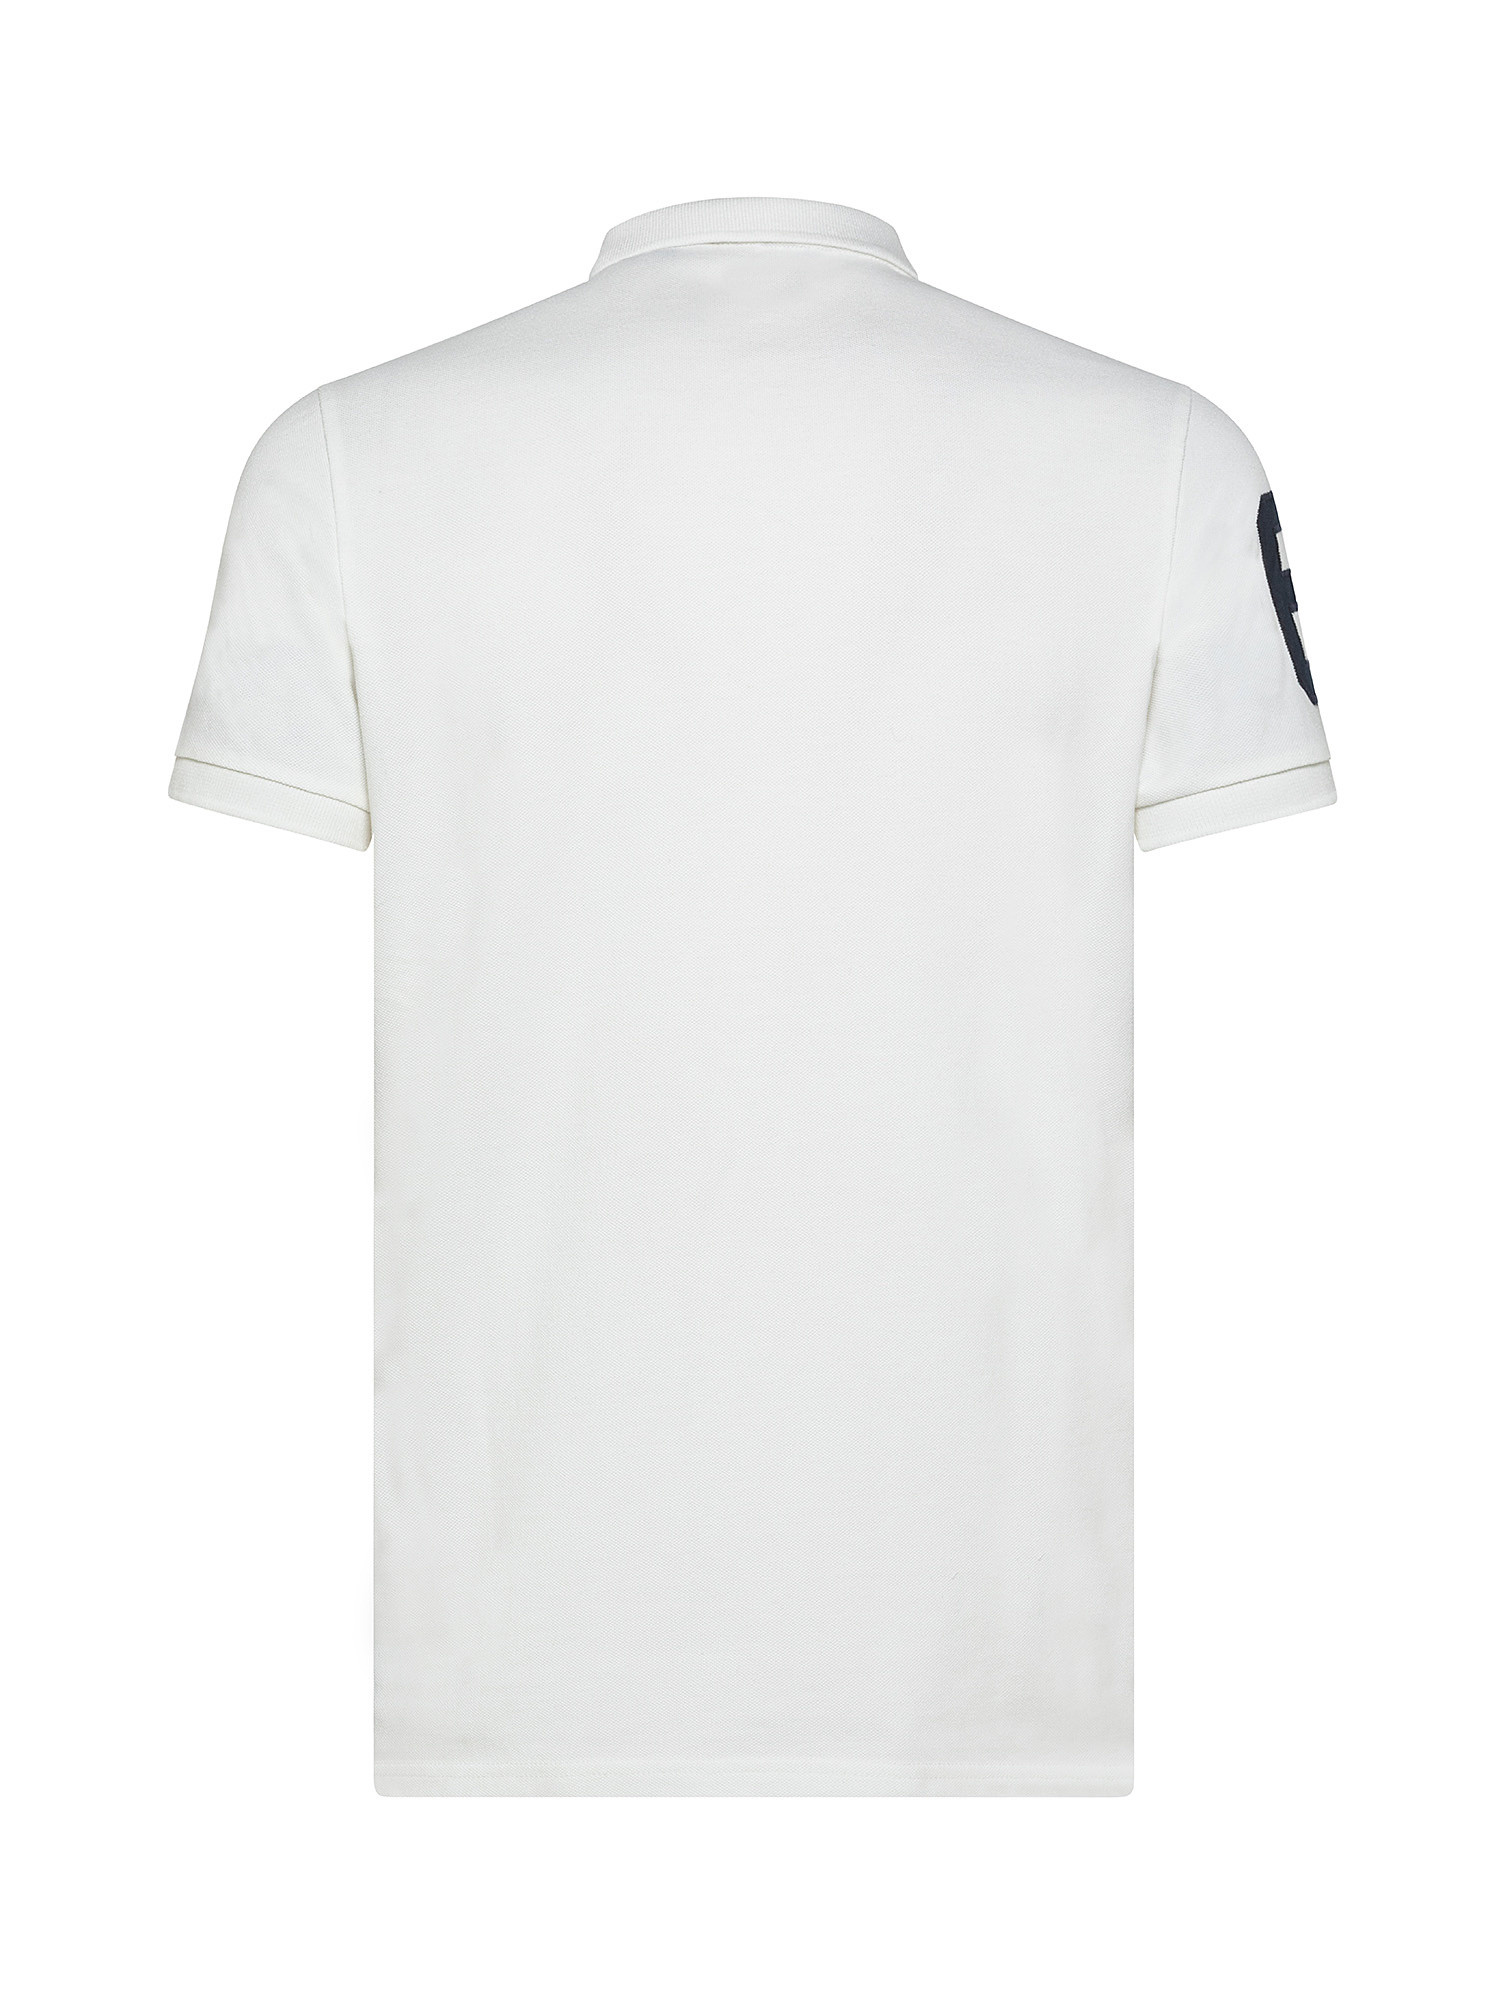 Polo shirt with embroidered graphics, White Ivory, large image number 1